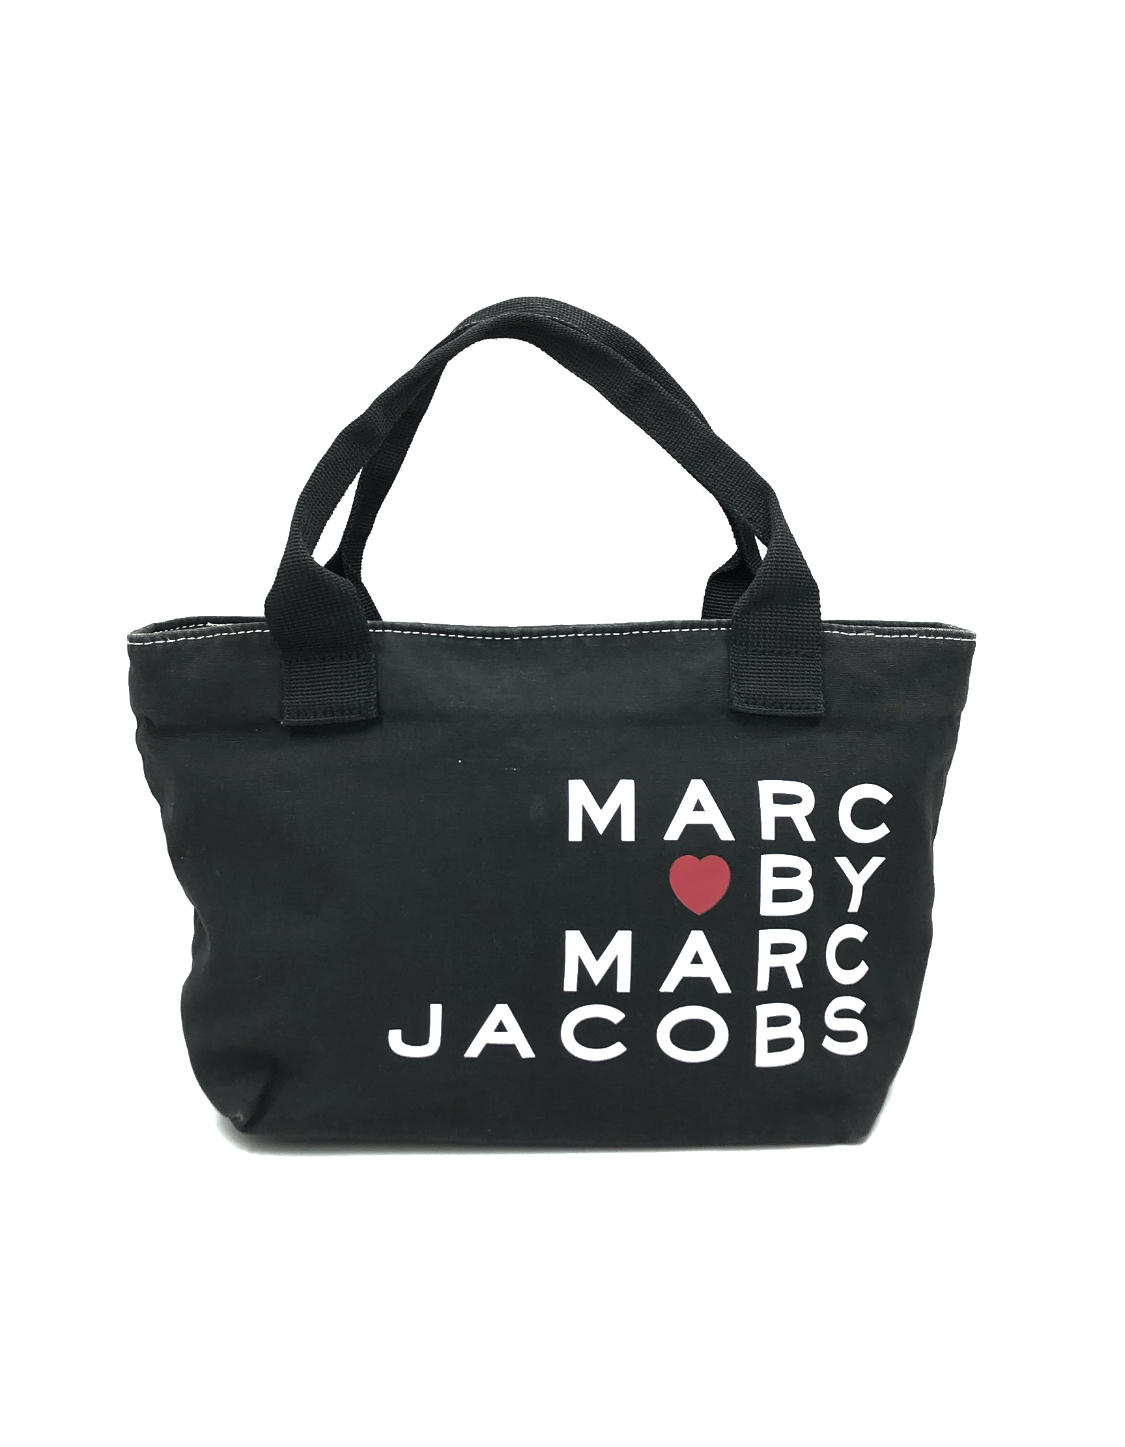 Marc by Marc Jacobs Small Black Love Tote